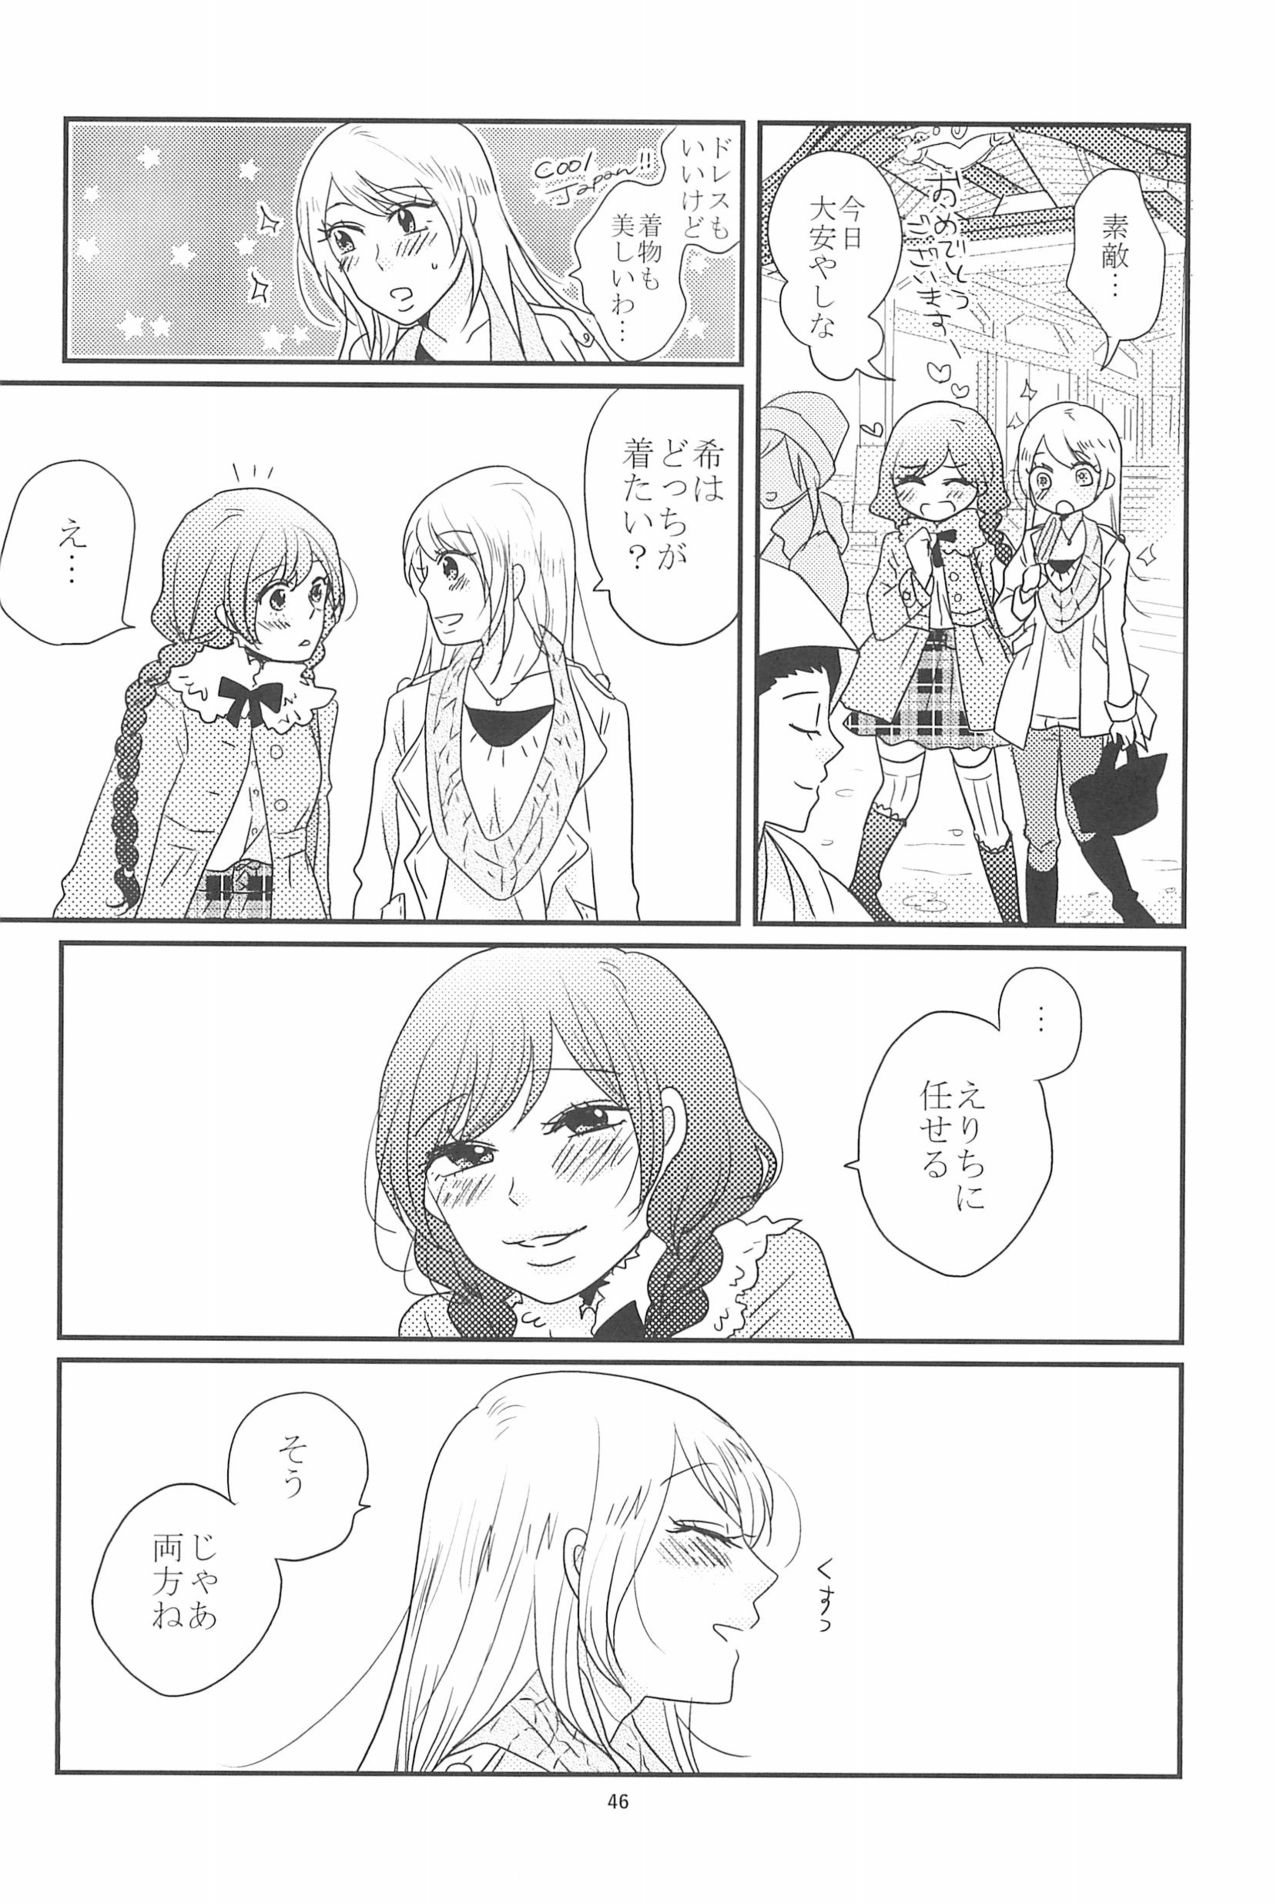 (C90) [BK*N2 (Mikawa Miso)] HAPPY GO LUCKY DAYS (Love Live!) page 50 full